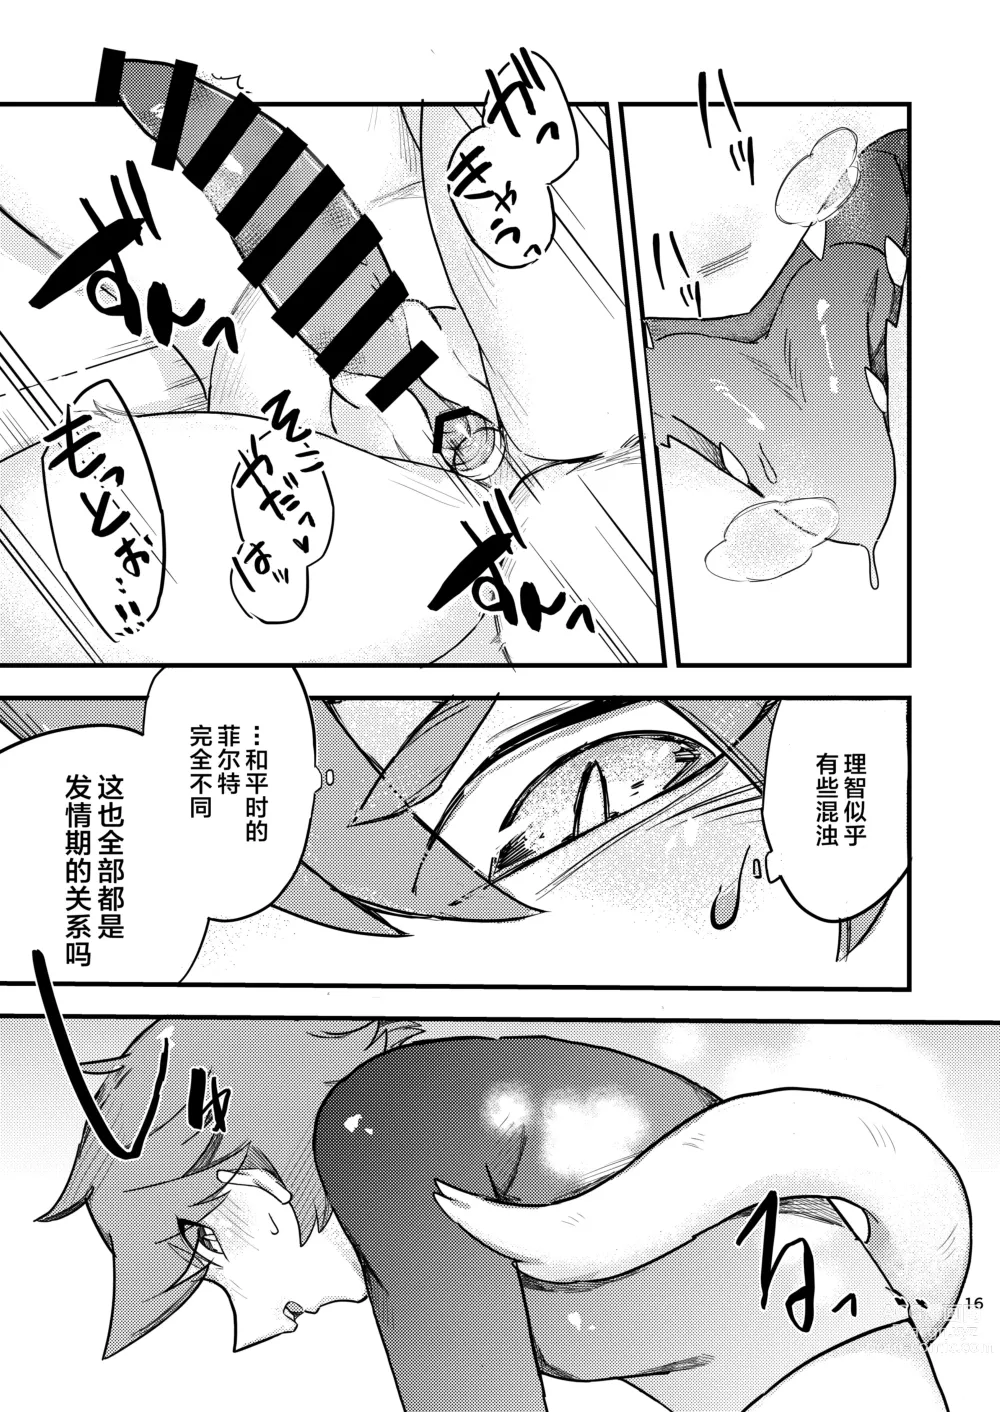 Page 14 of doujinshi 第一次的发情期